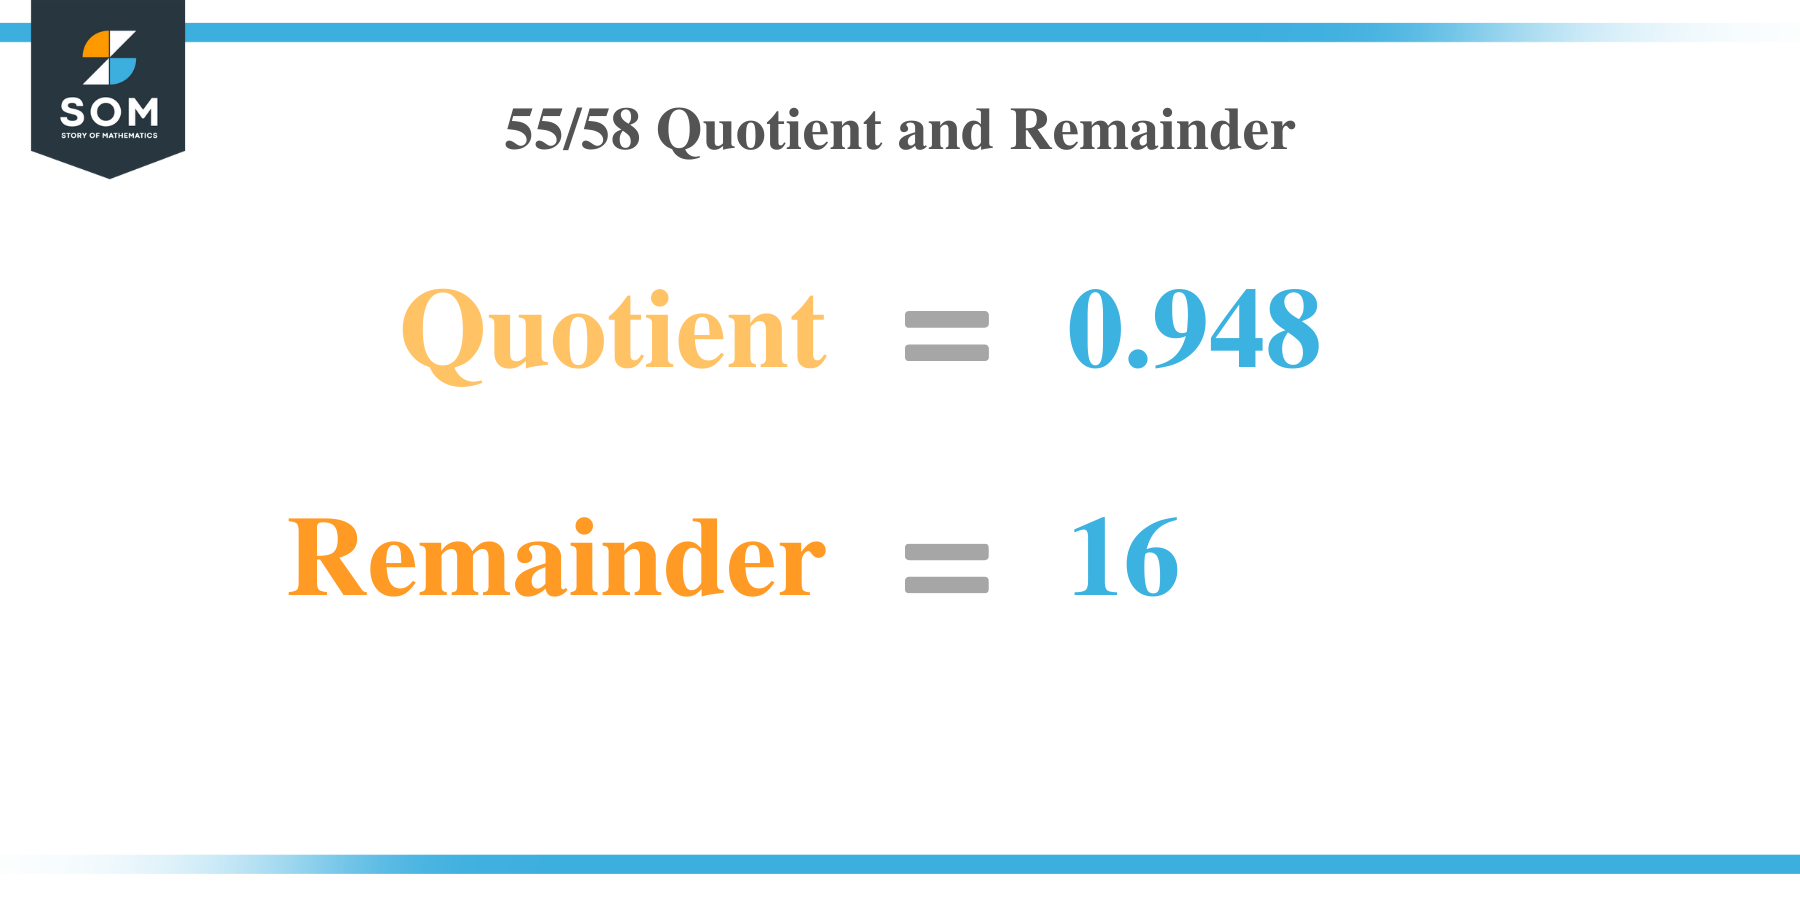 55 by 58 Quotient and Remainder